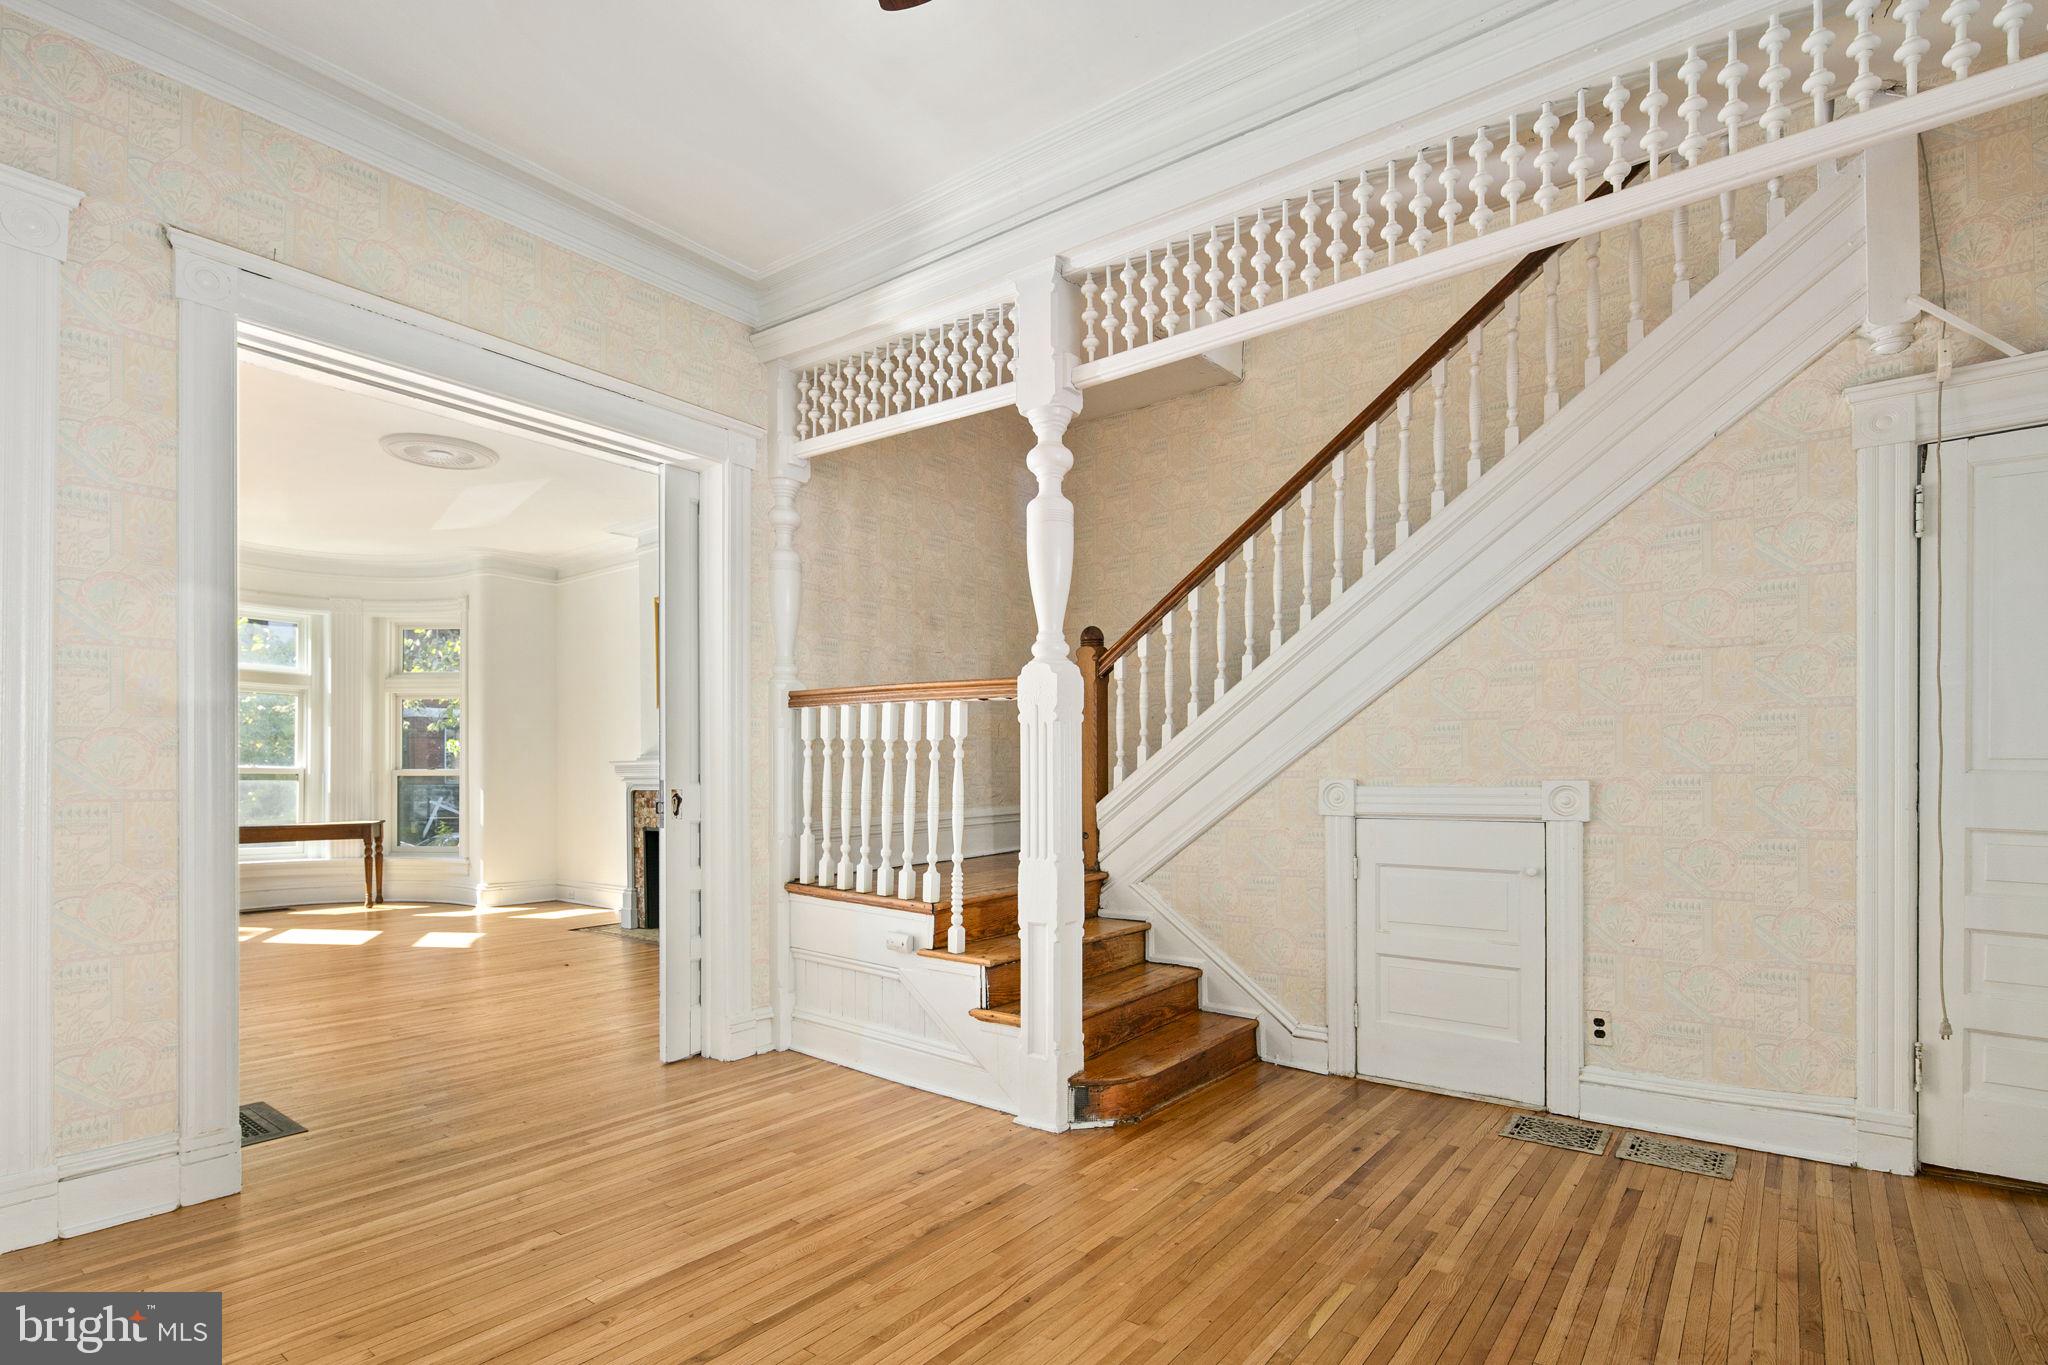 a view of entryway with wooden floor and stairs